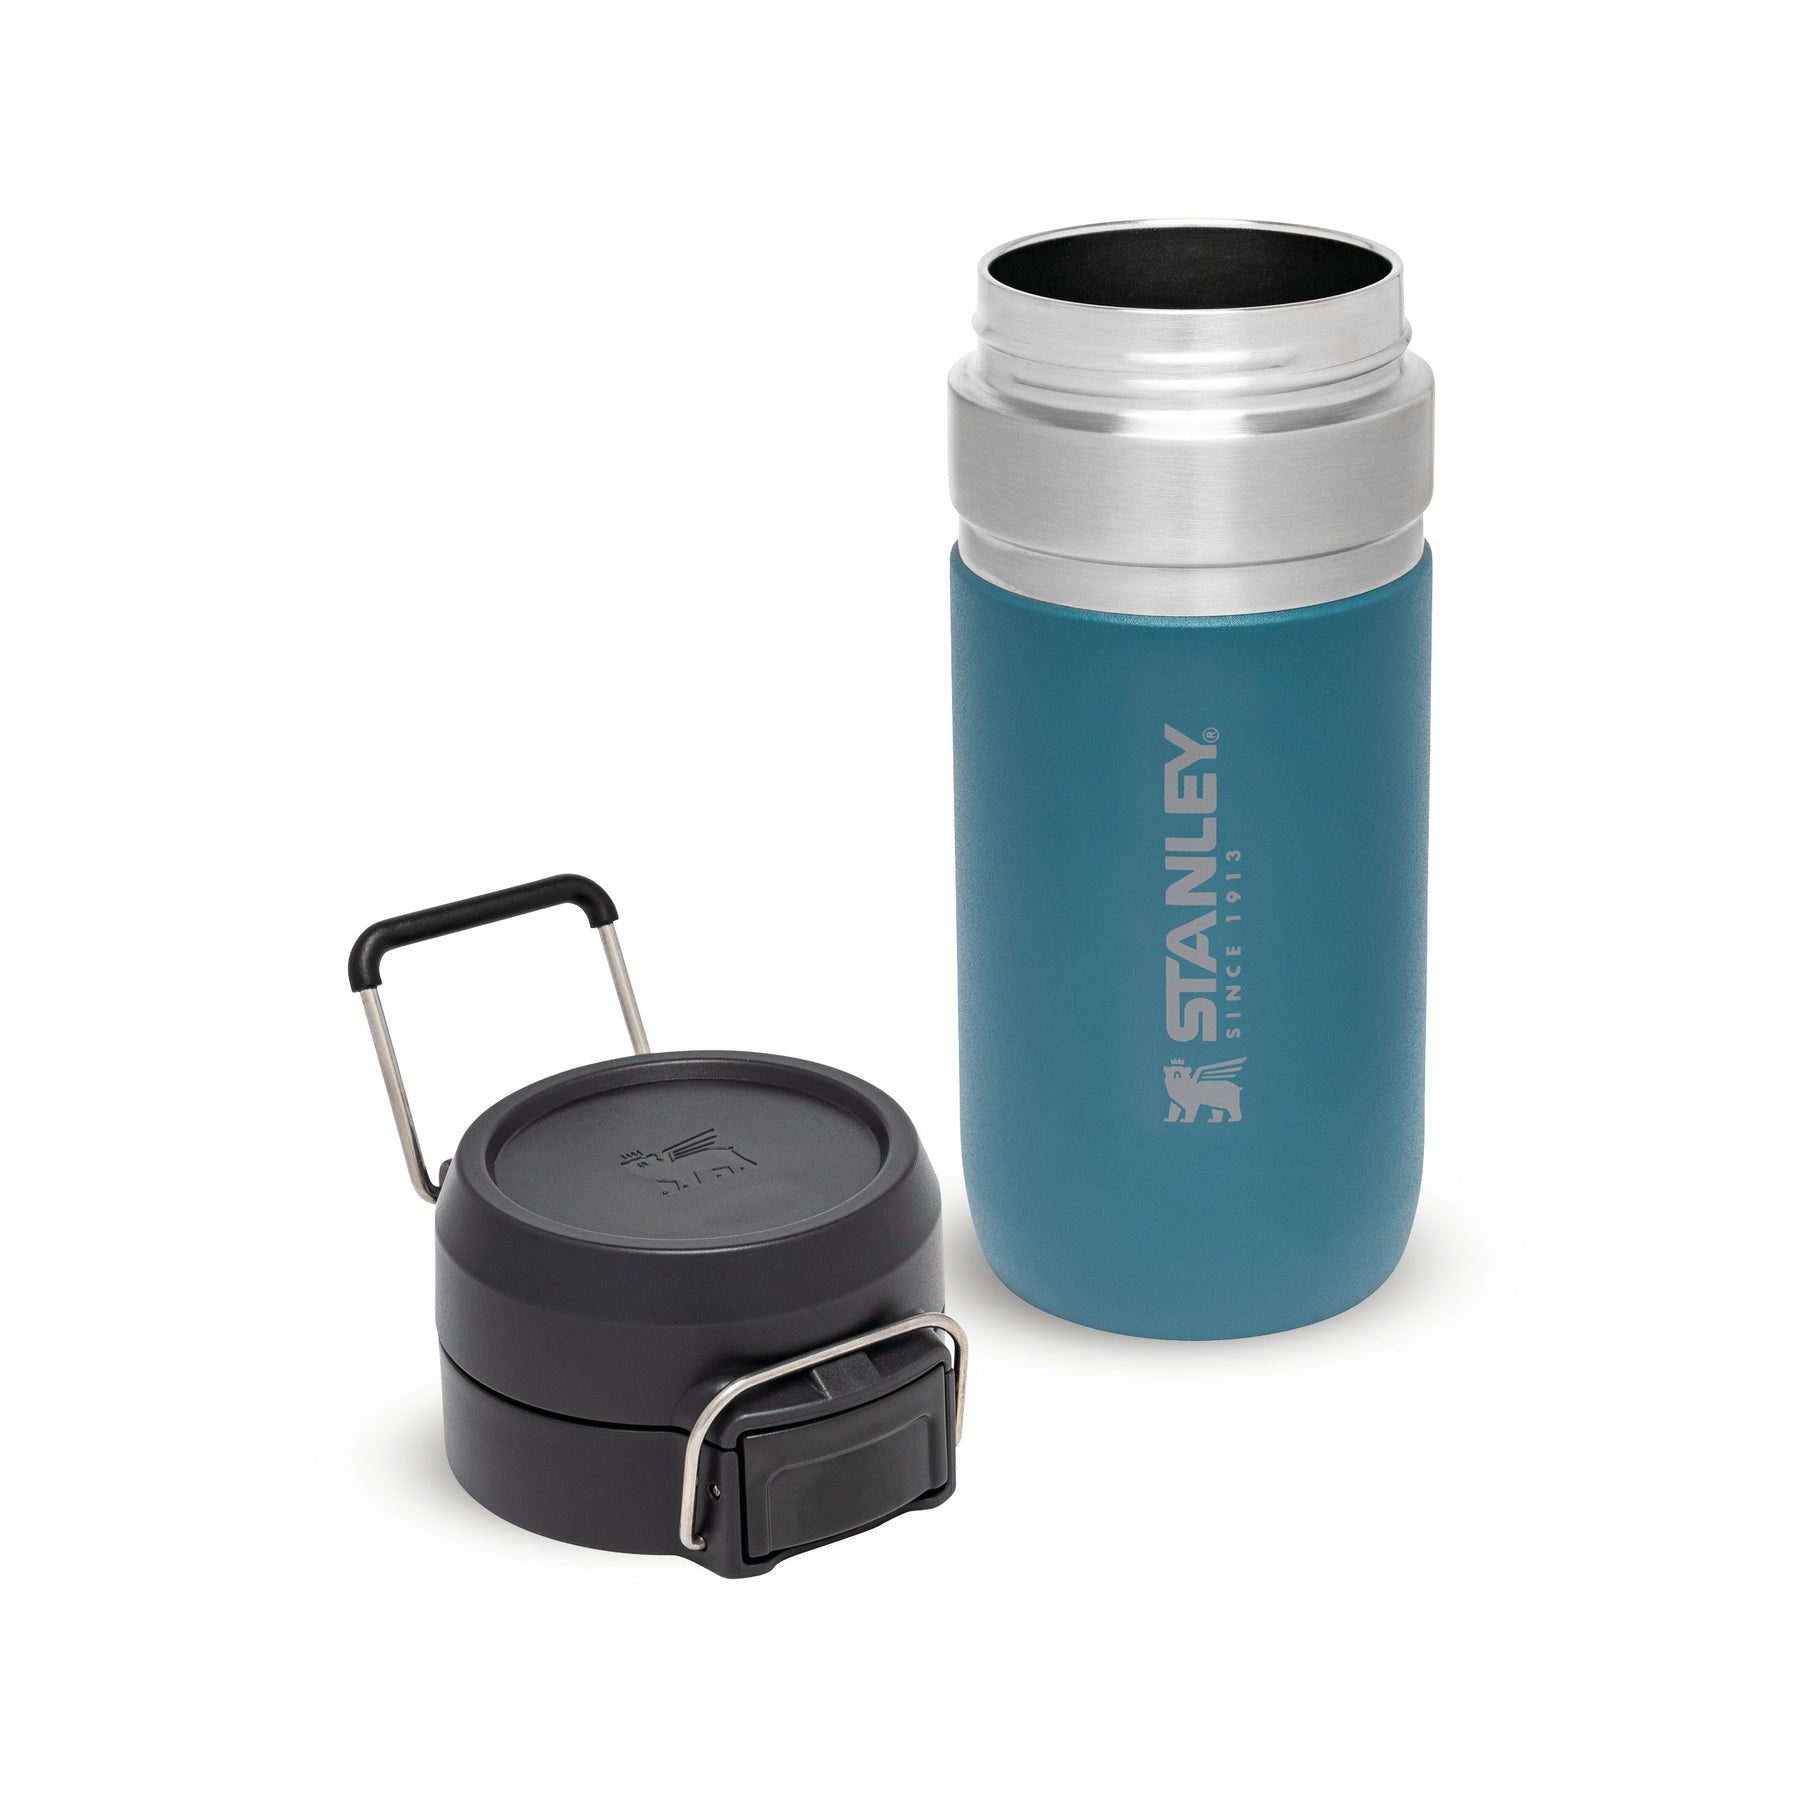 https://cdn.shopify.com/s/files/1/0513/8114/1694/products/Stanley-TheGOQuick-FlipWaterBottle0.47L-16OZ-Lagoon-4_8603a2d1-7959-4cfe-a315-88a868616c2f_1800x1800.jpg?v=1662646470